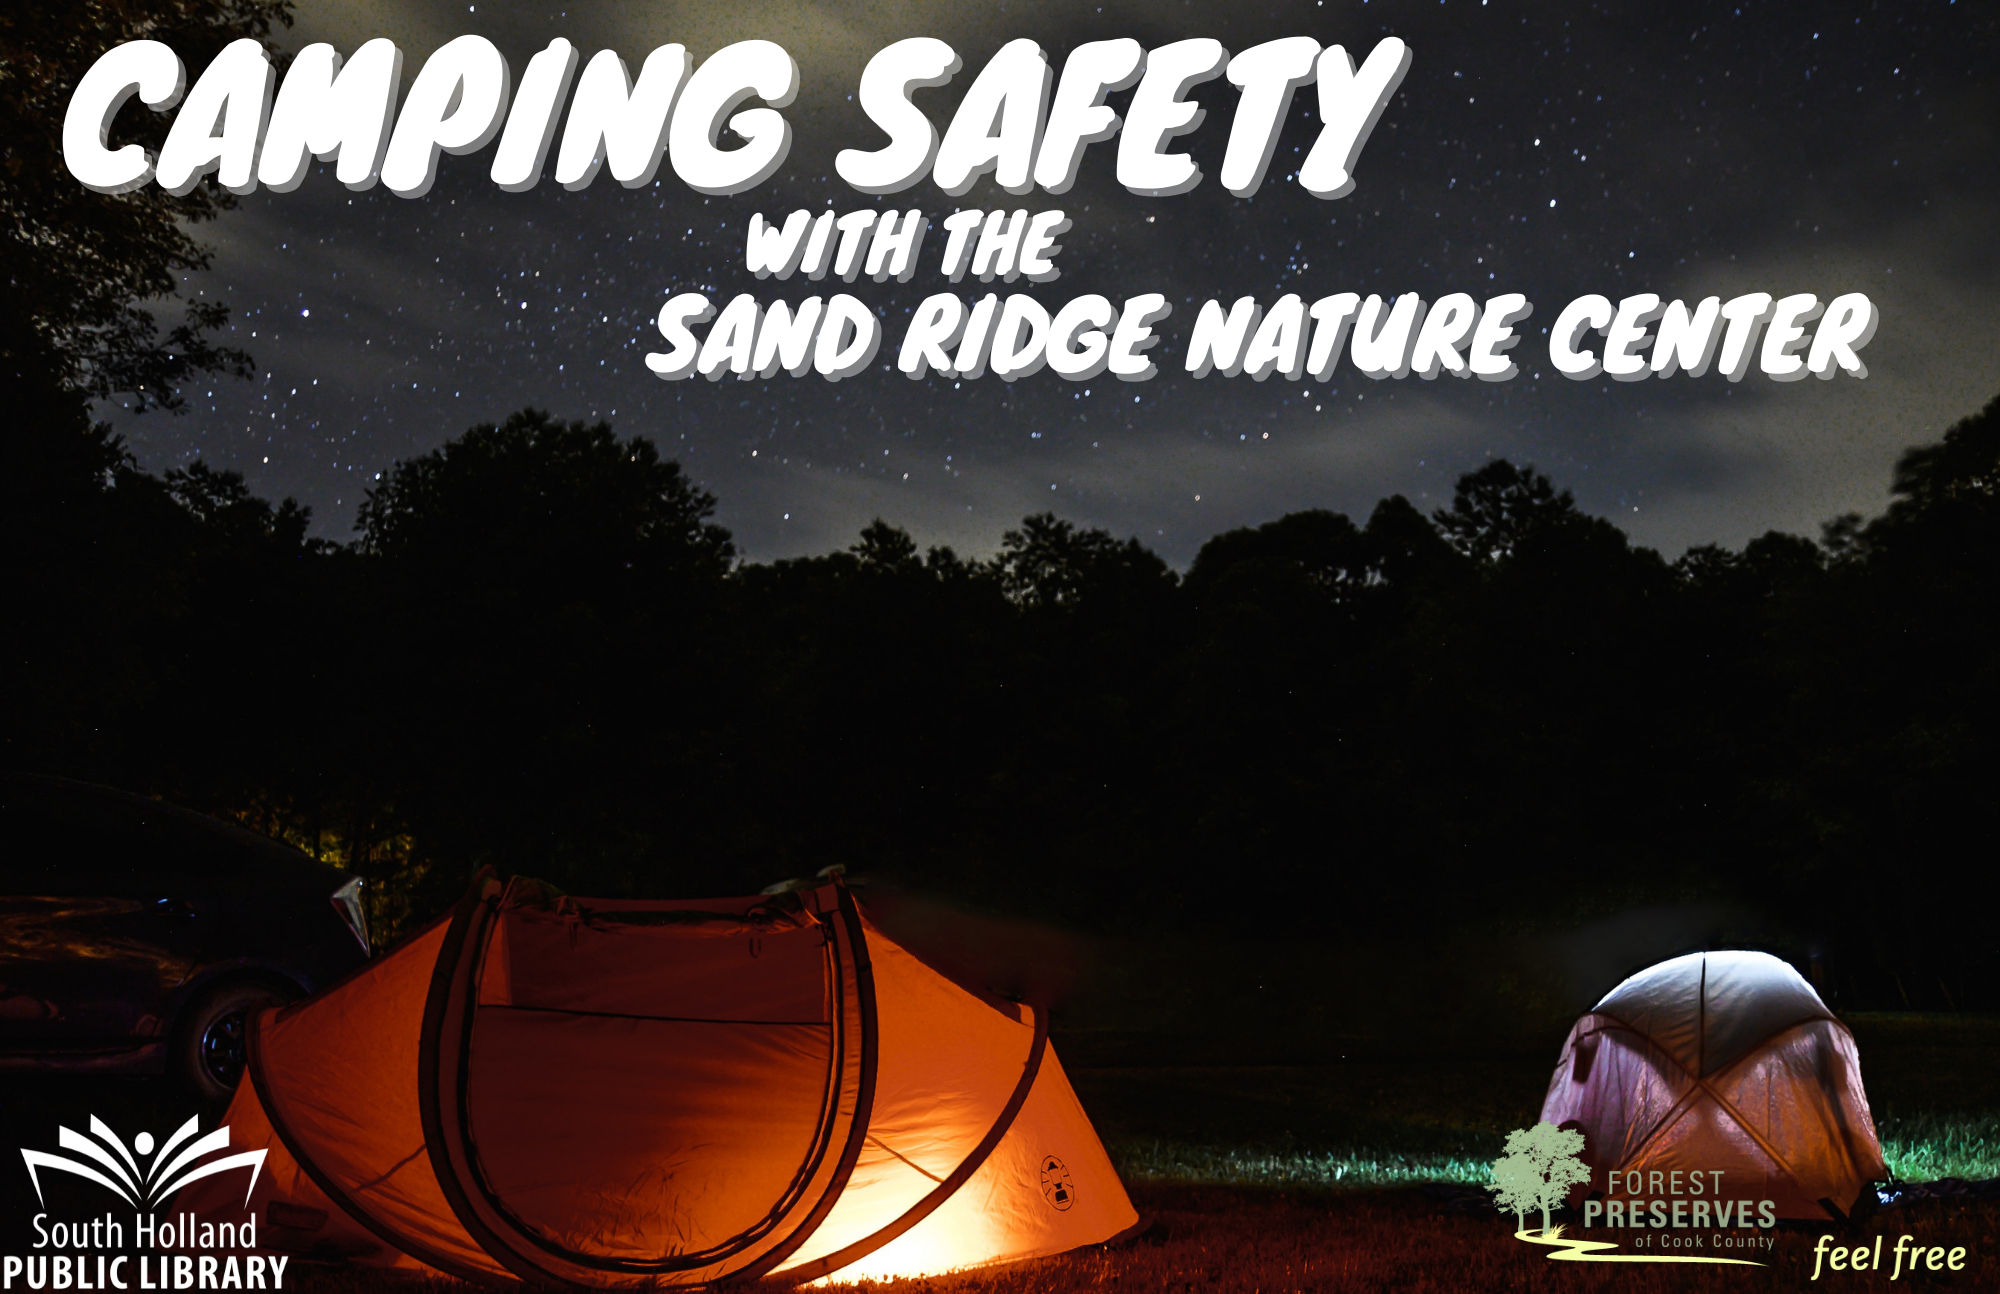 Camping Safety with the Sand Ridge Nature Center